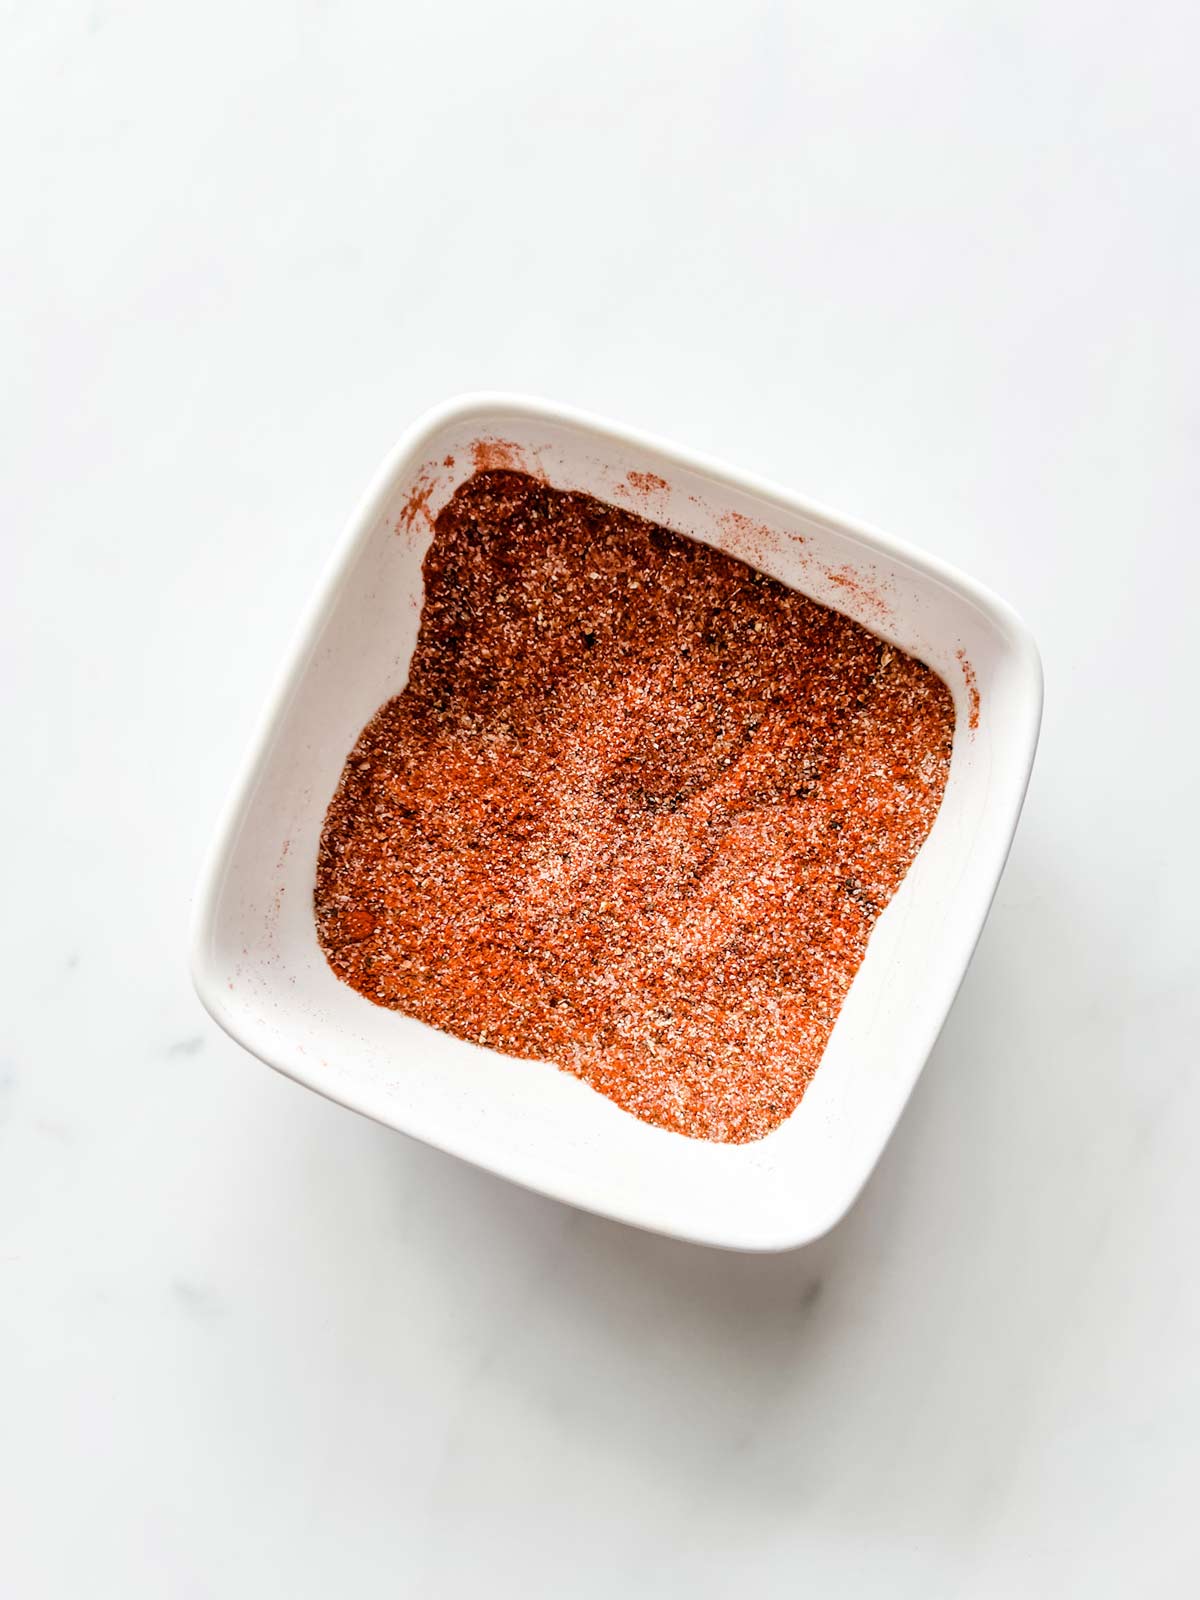 Small square white bowl with a seasoning mixture in it.